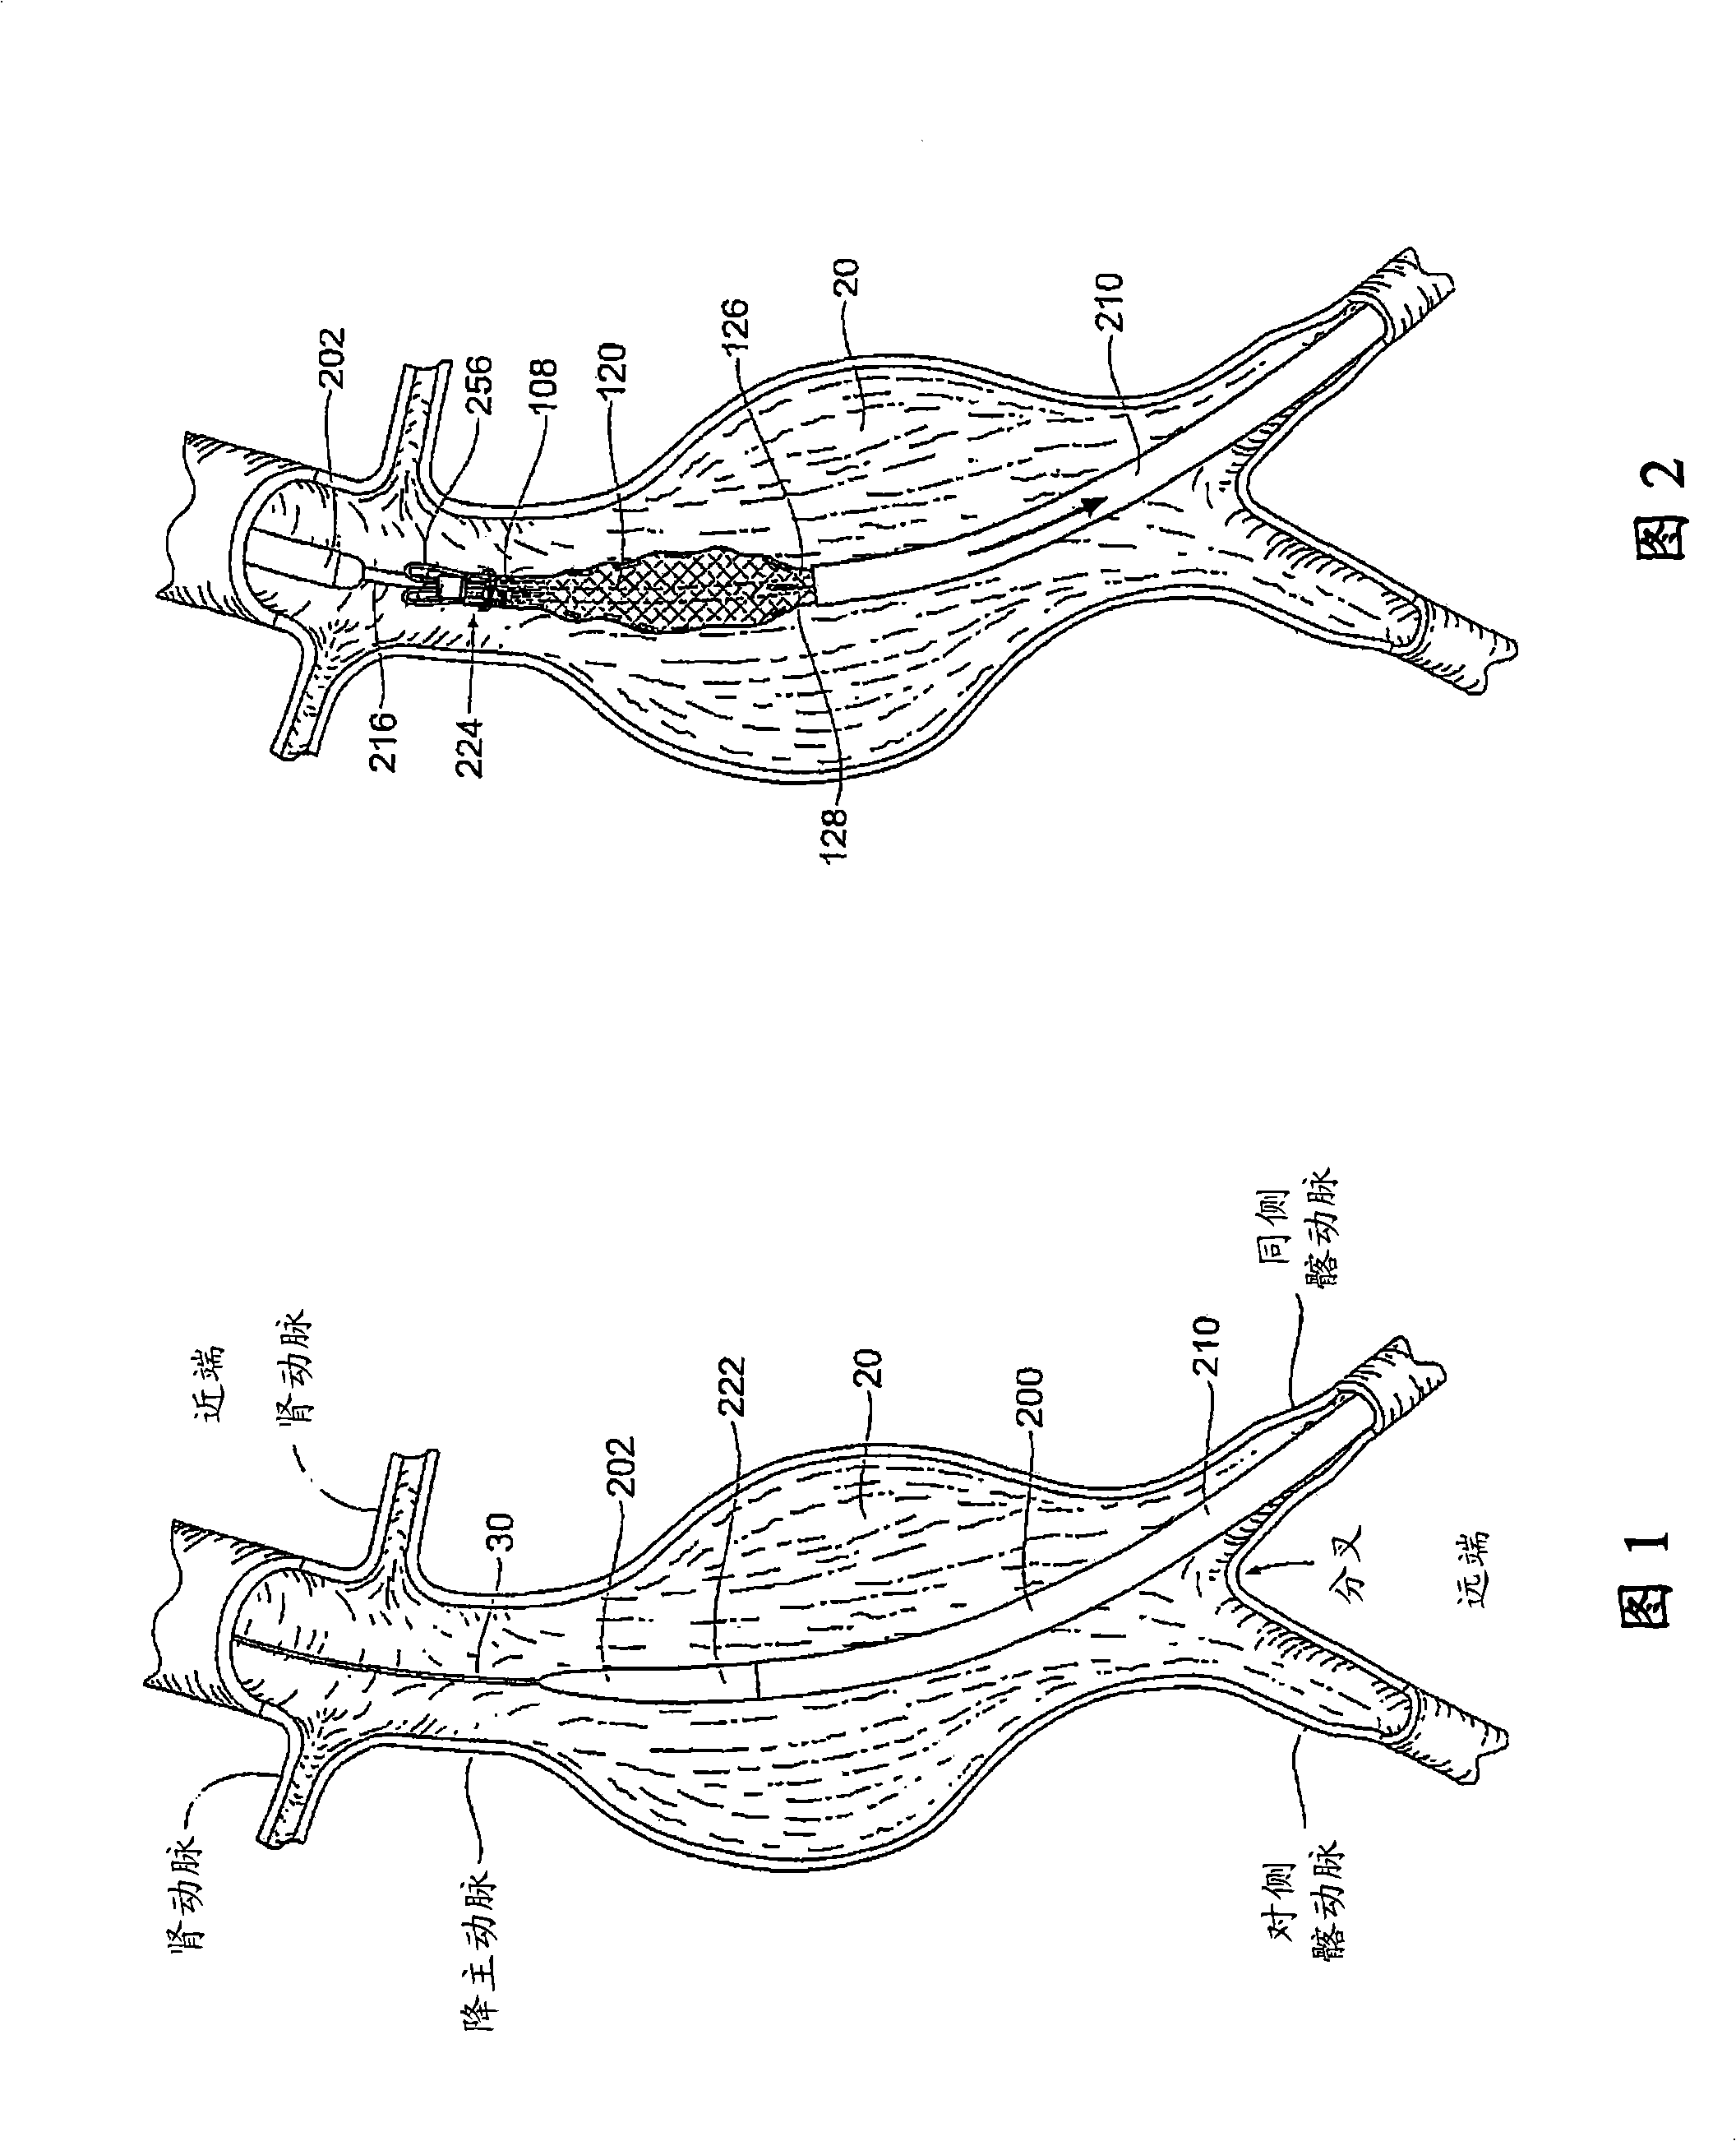 Devices, systems and methods for prosthesis delivery and implantation